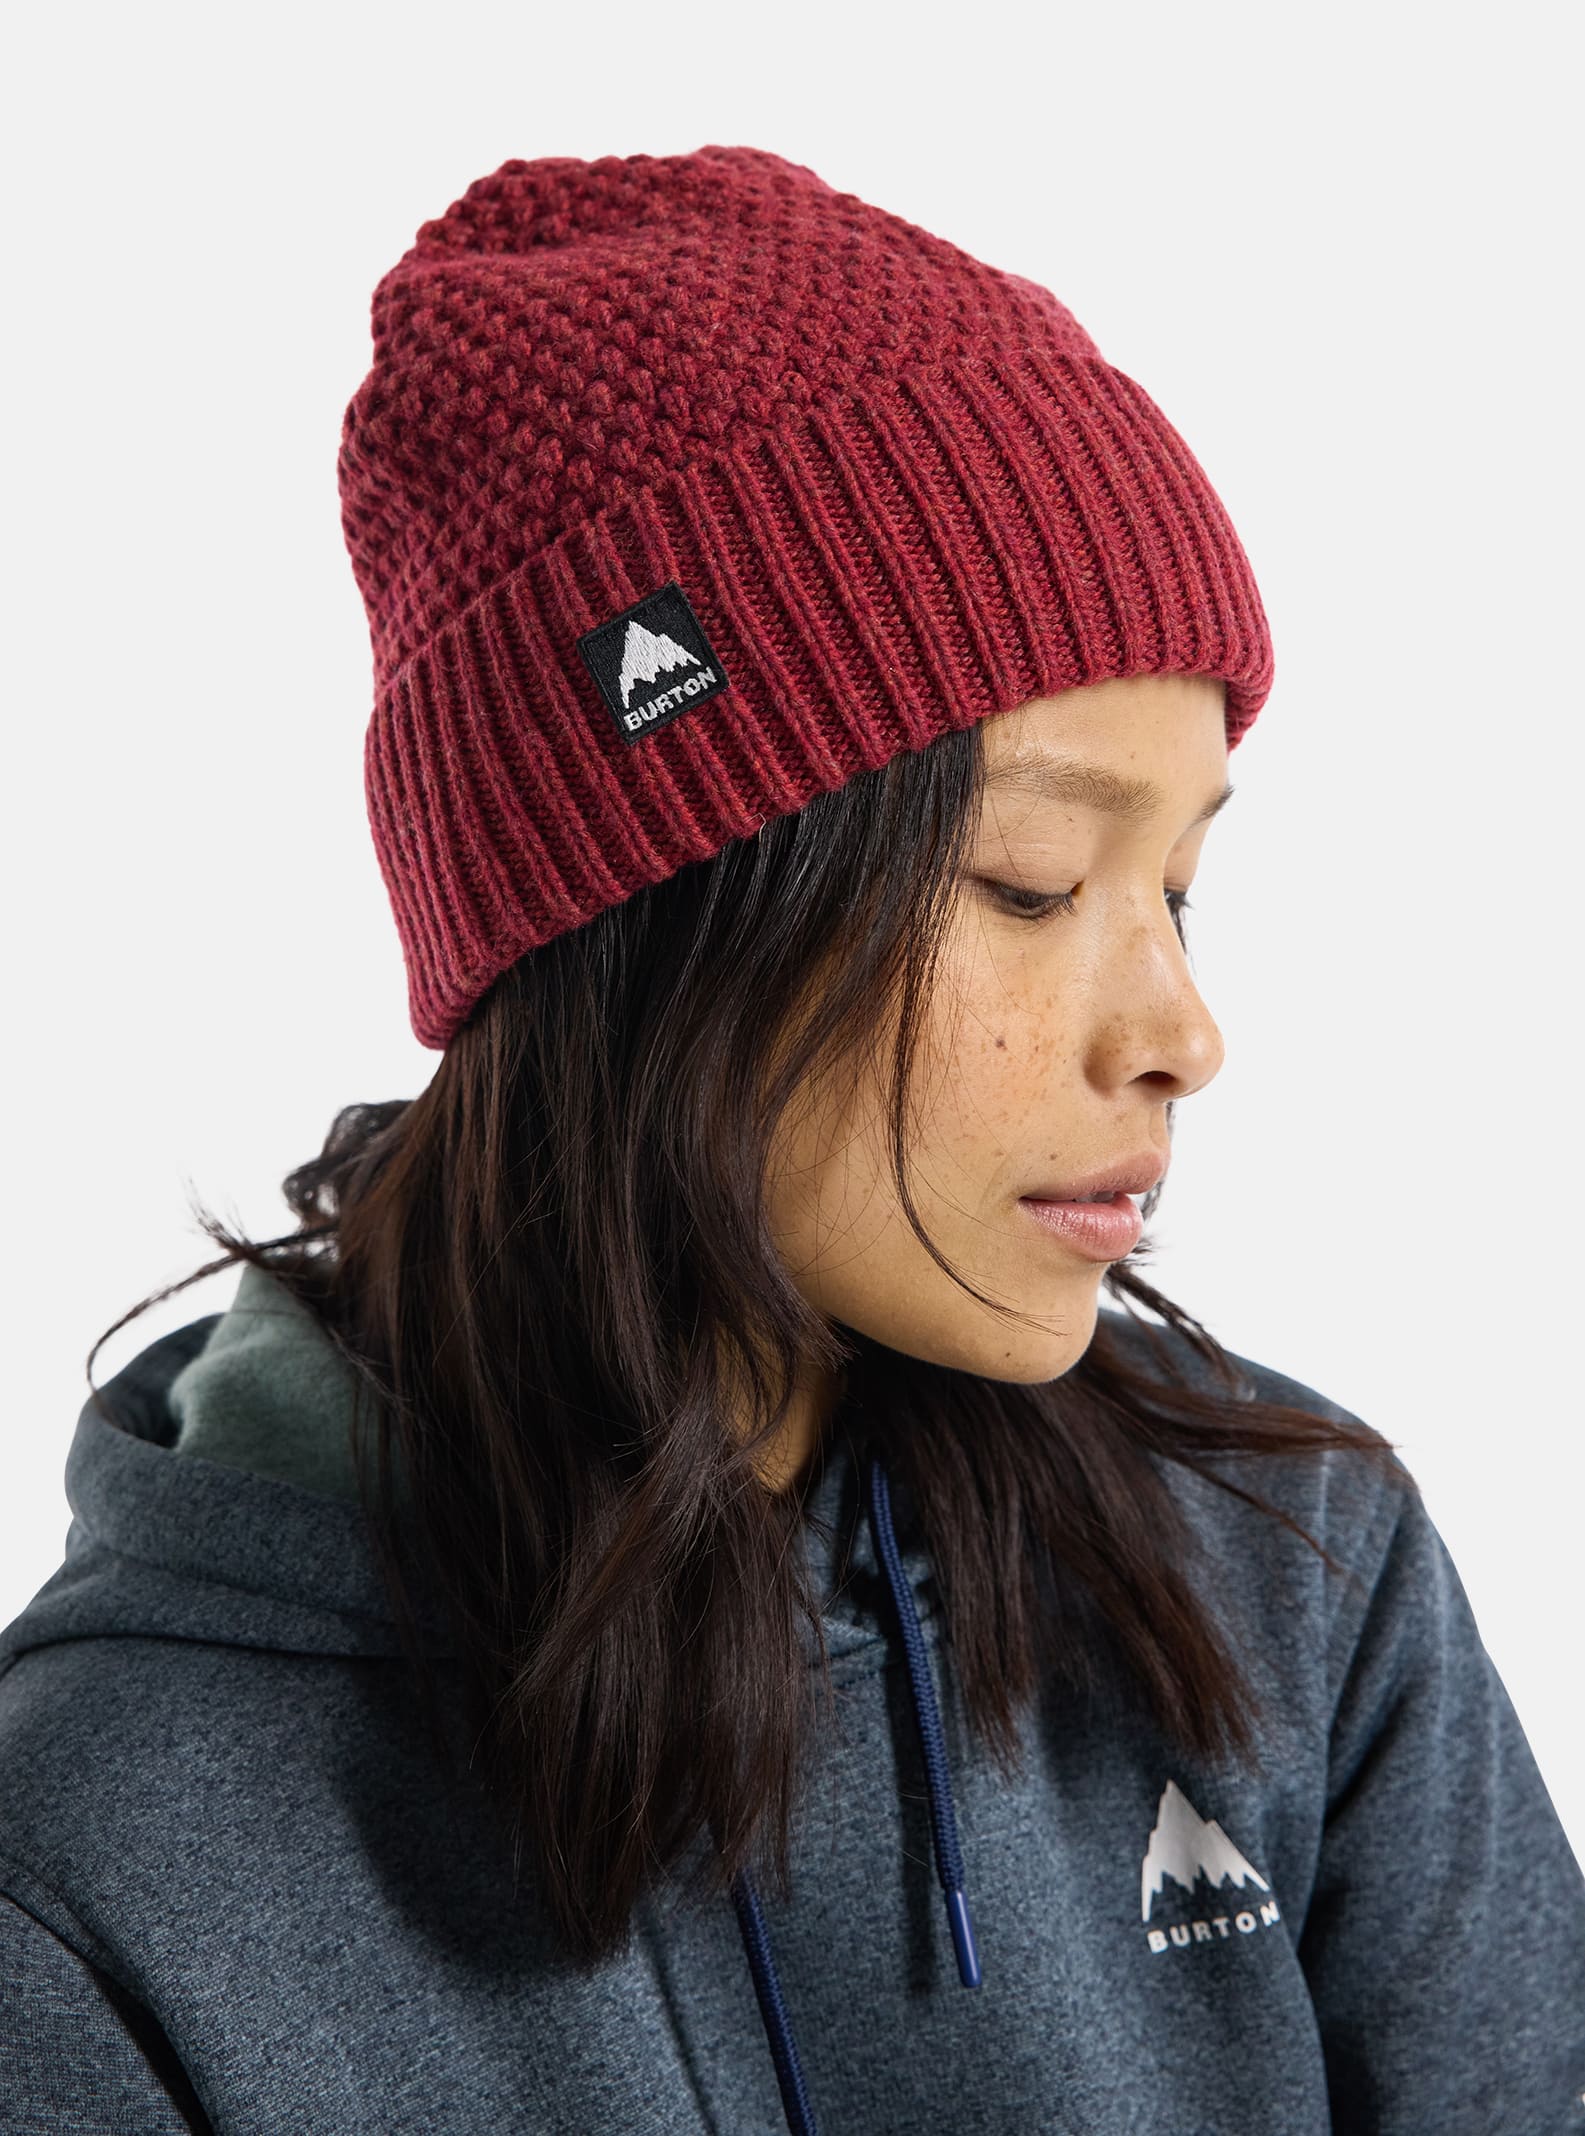 Outlet for Snowboard Gear & Clothing | Burton Snowboards BG